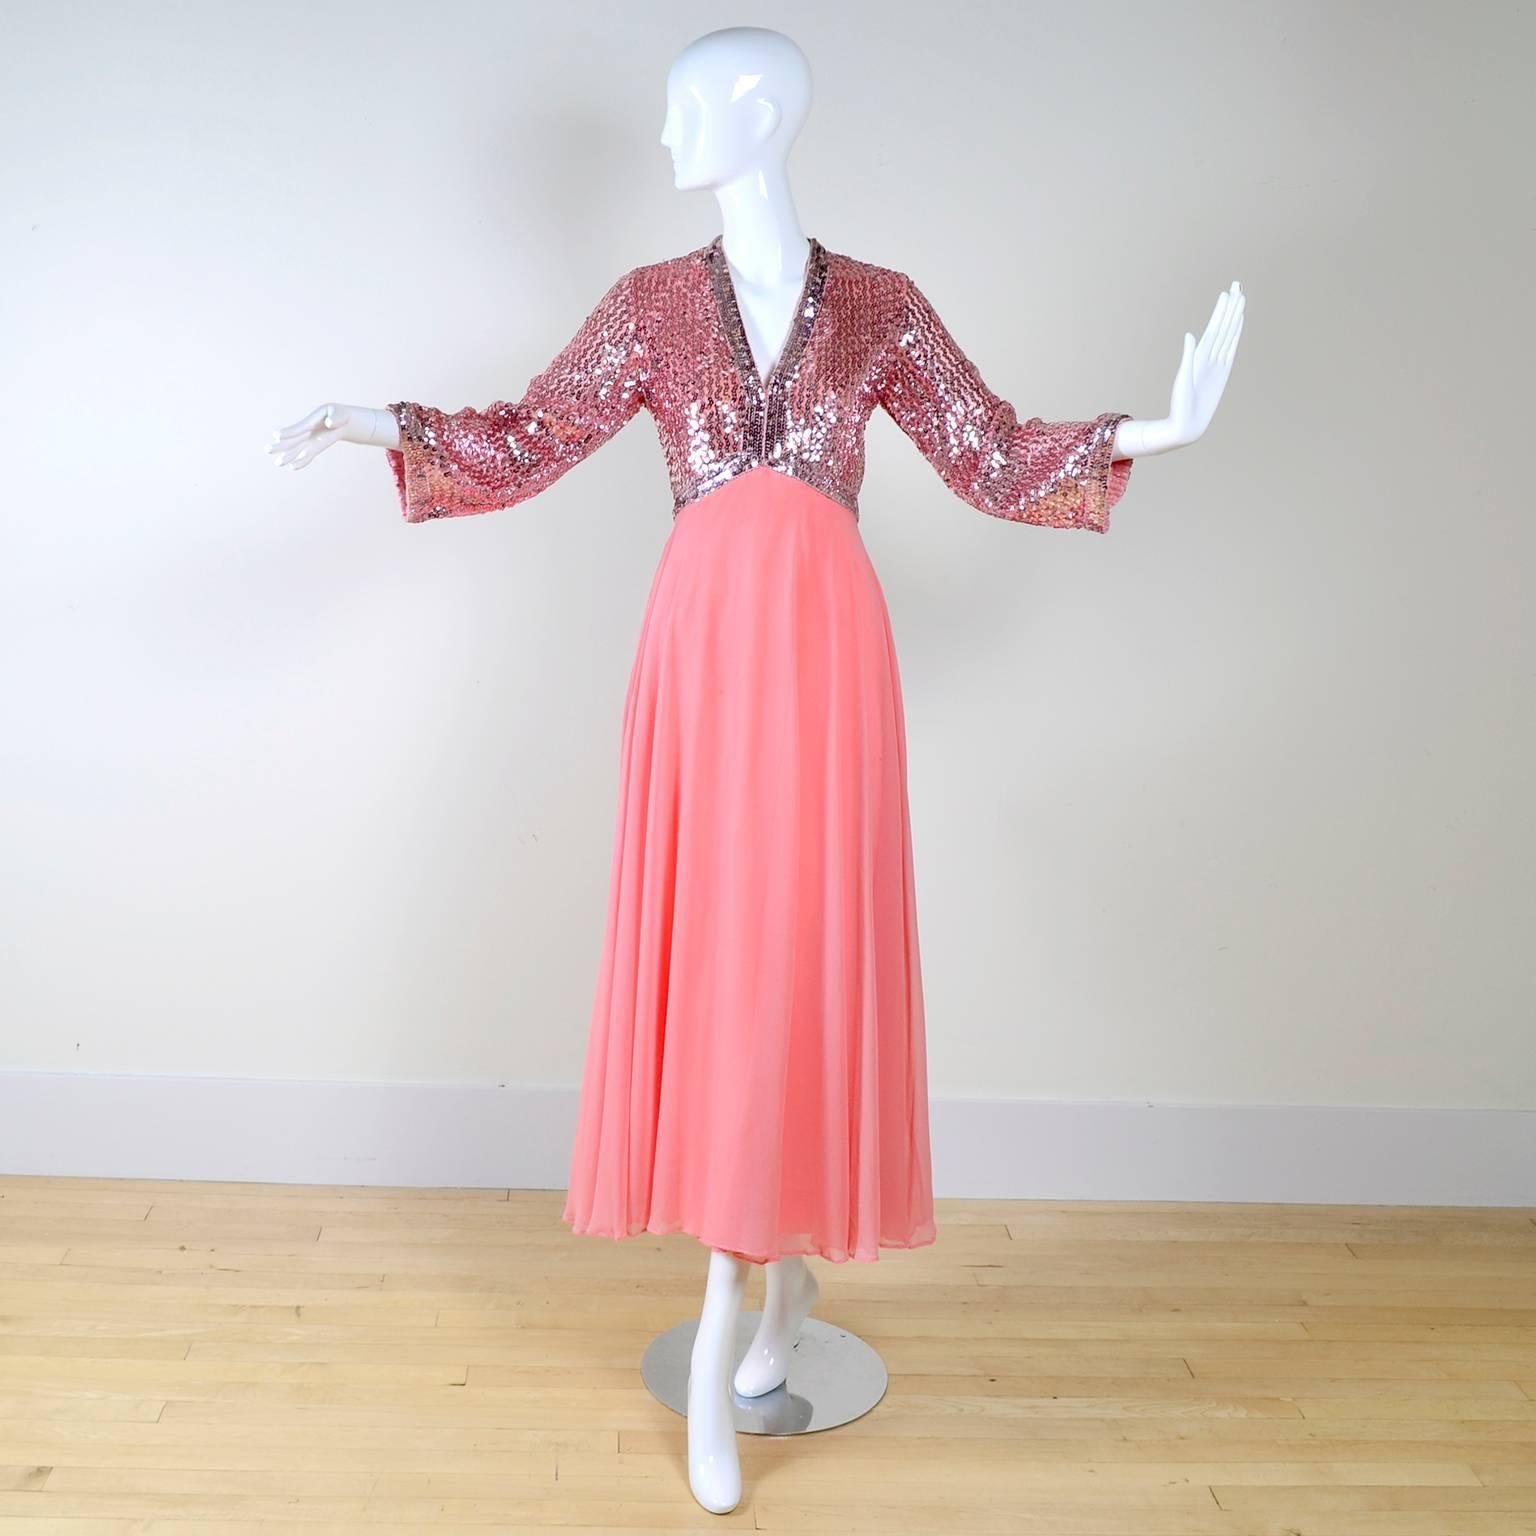 Gorgeous late 1960's or early 1970's pink dress with a lined chiffon skirt and deep V neck. The empire bodice is covered in silvery pink sequins, and is lined. This dress is in very good condition, with just a few loose threads. The arms are 3/4